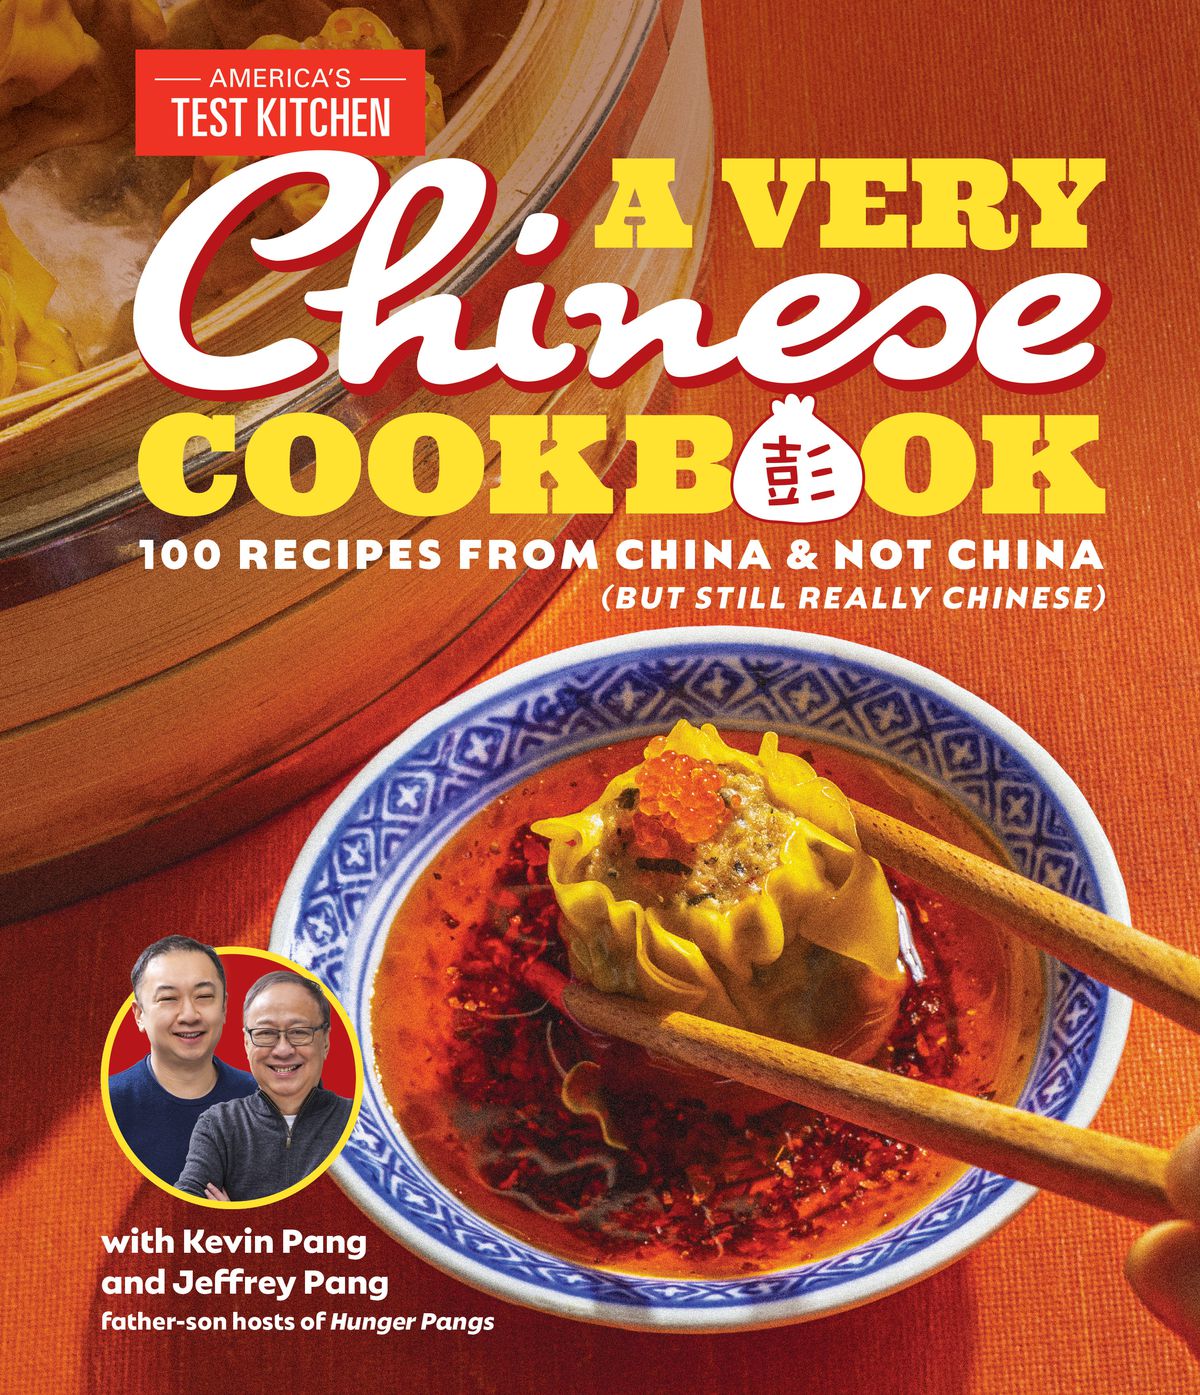 The cover of “A Very Chinese Cookbook.”